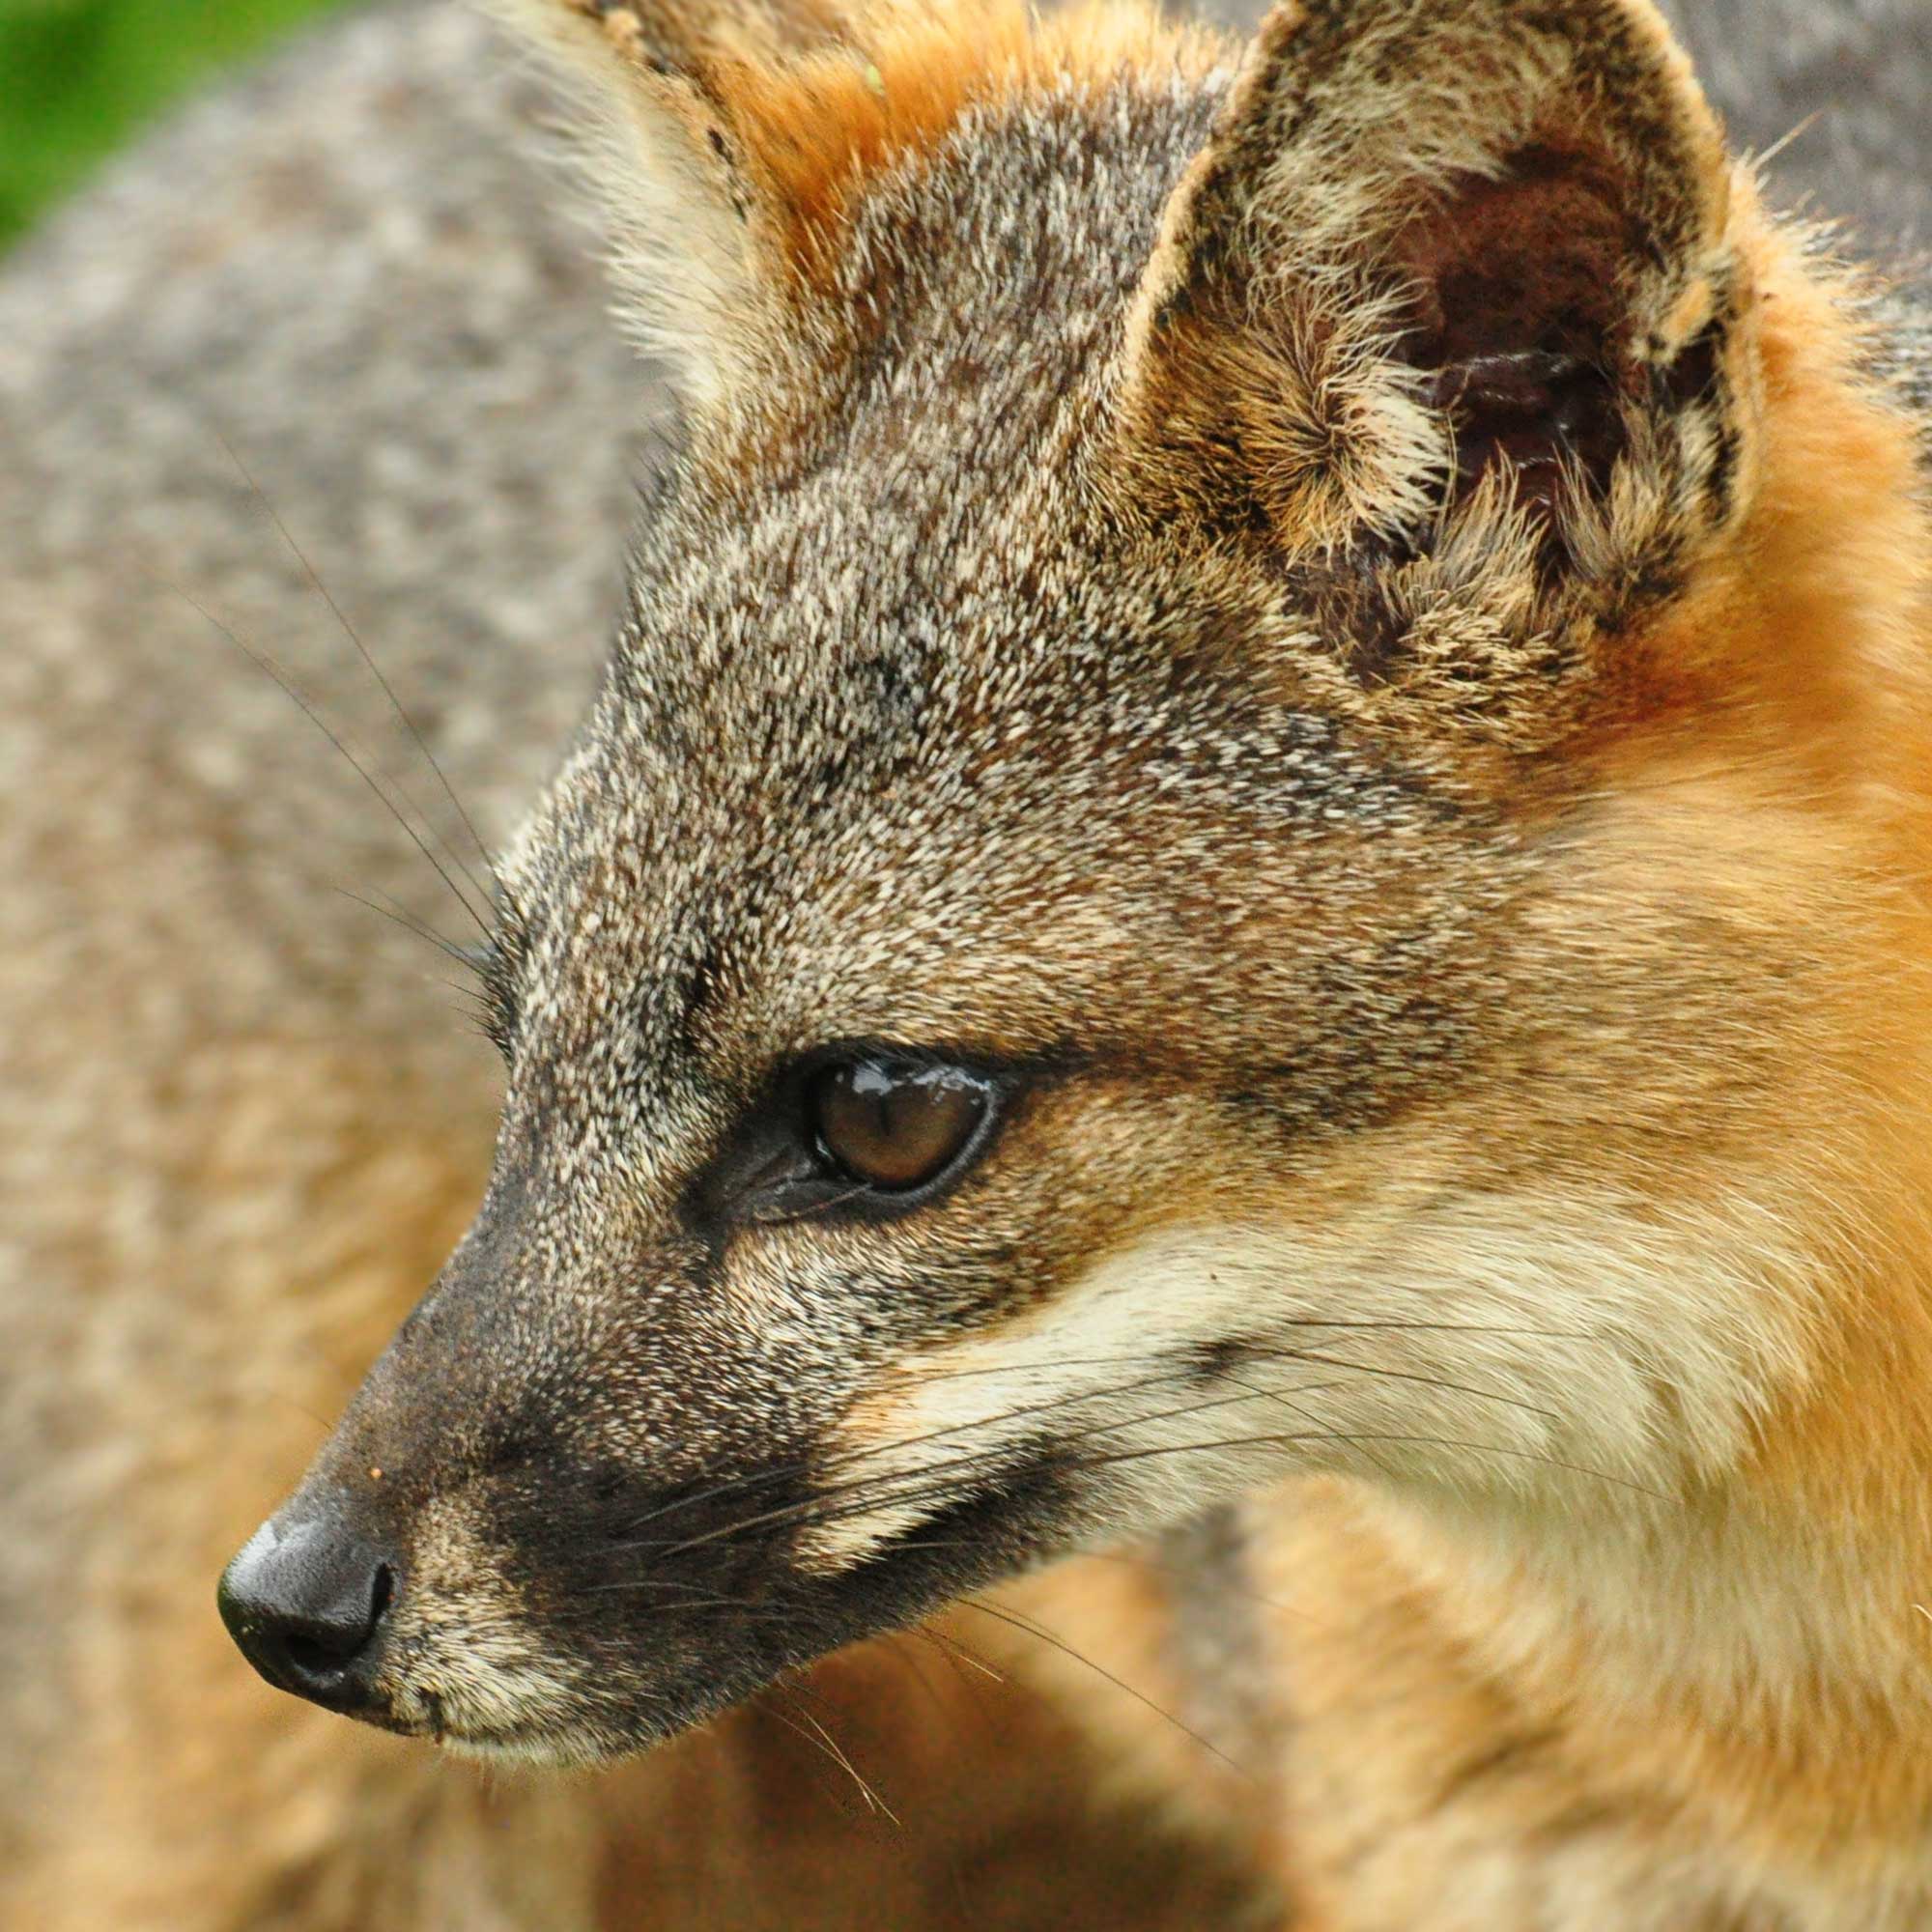 A Santa Cruz Island fox shown in close up, with its face shown nearly in profile.